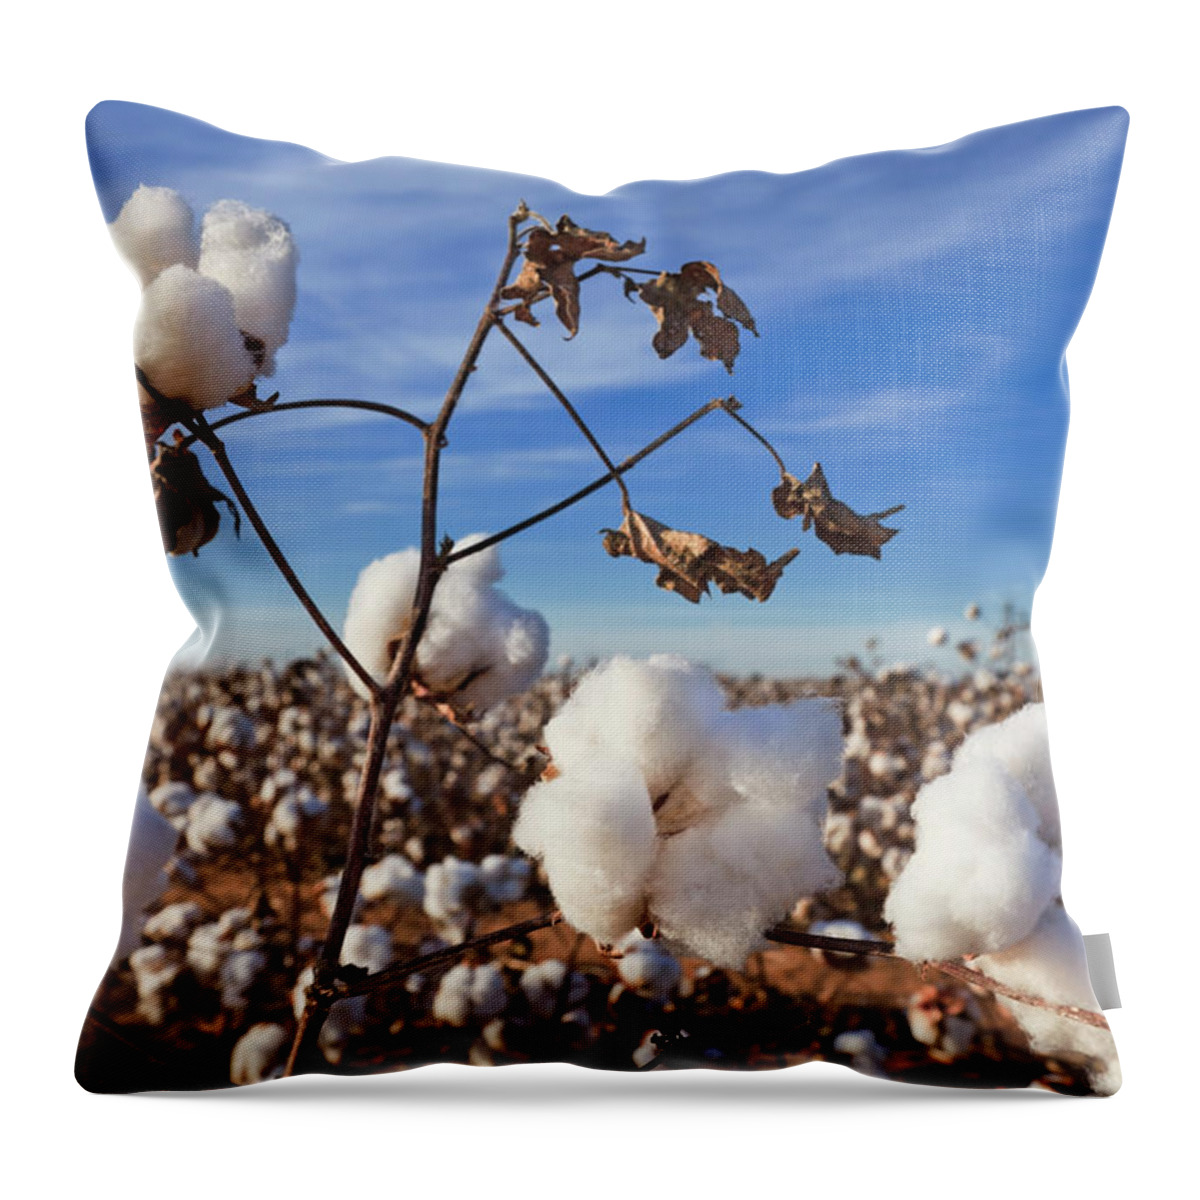 Fiber Throw Pillow featuring the photograph Cotton In Field Ready For Harvest by Dszc